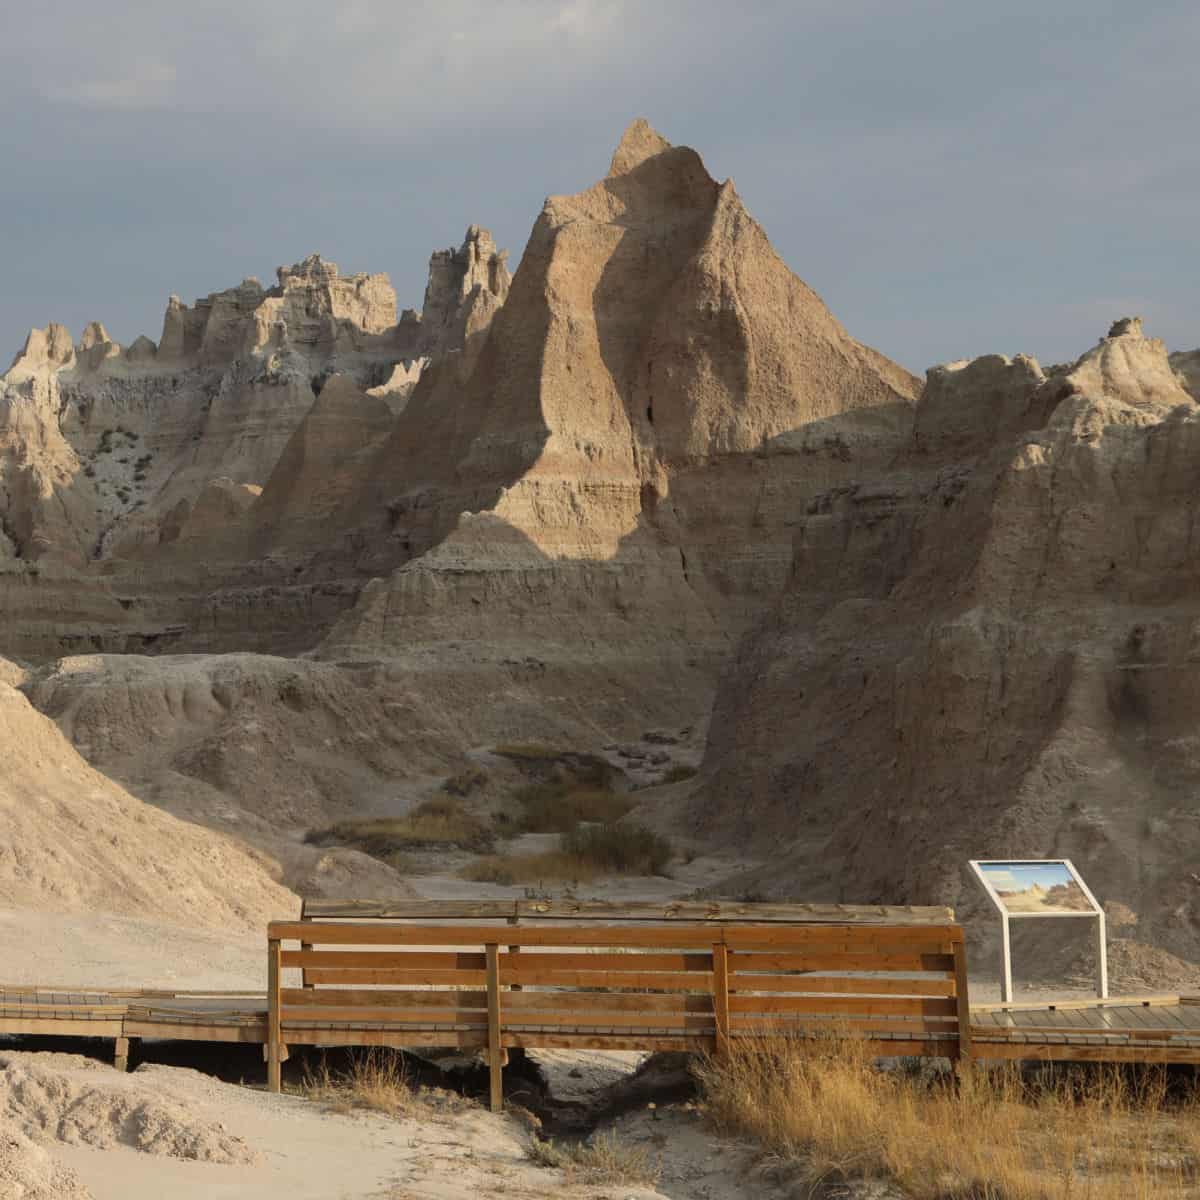 Fossil Exhibit Trail in Badlands National Park